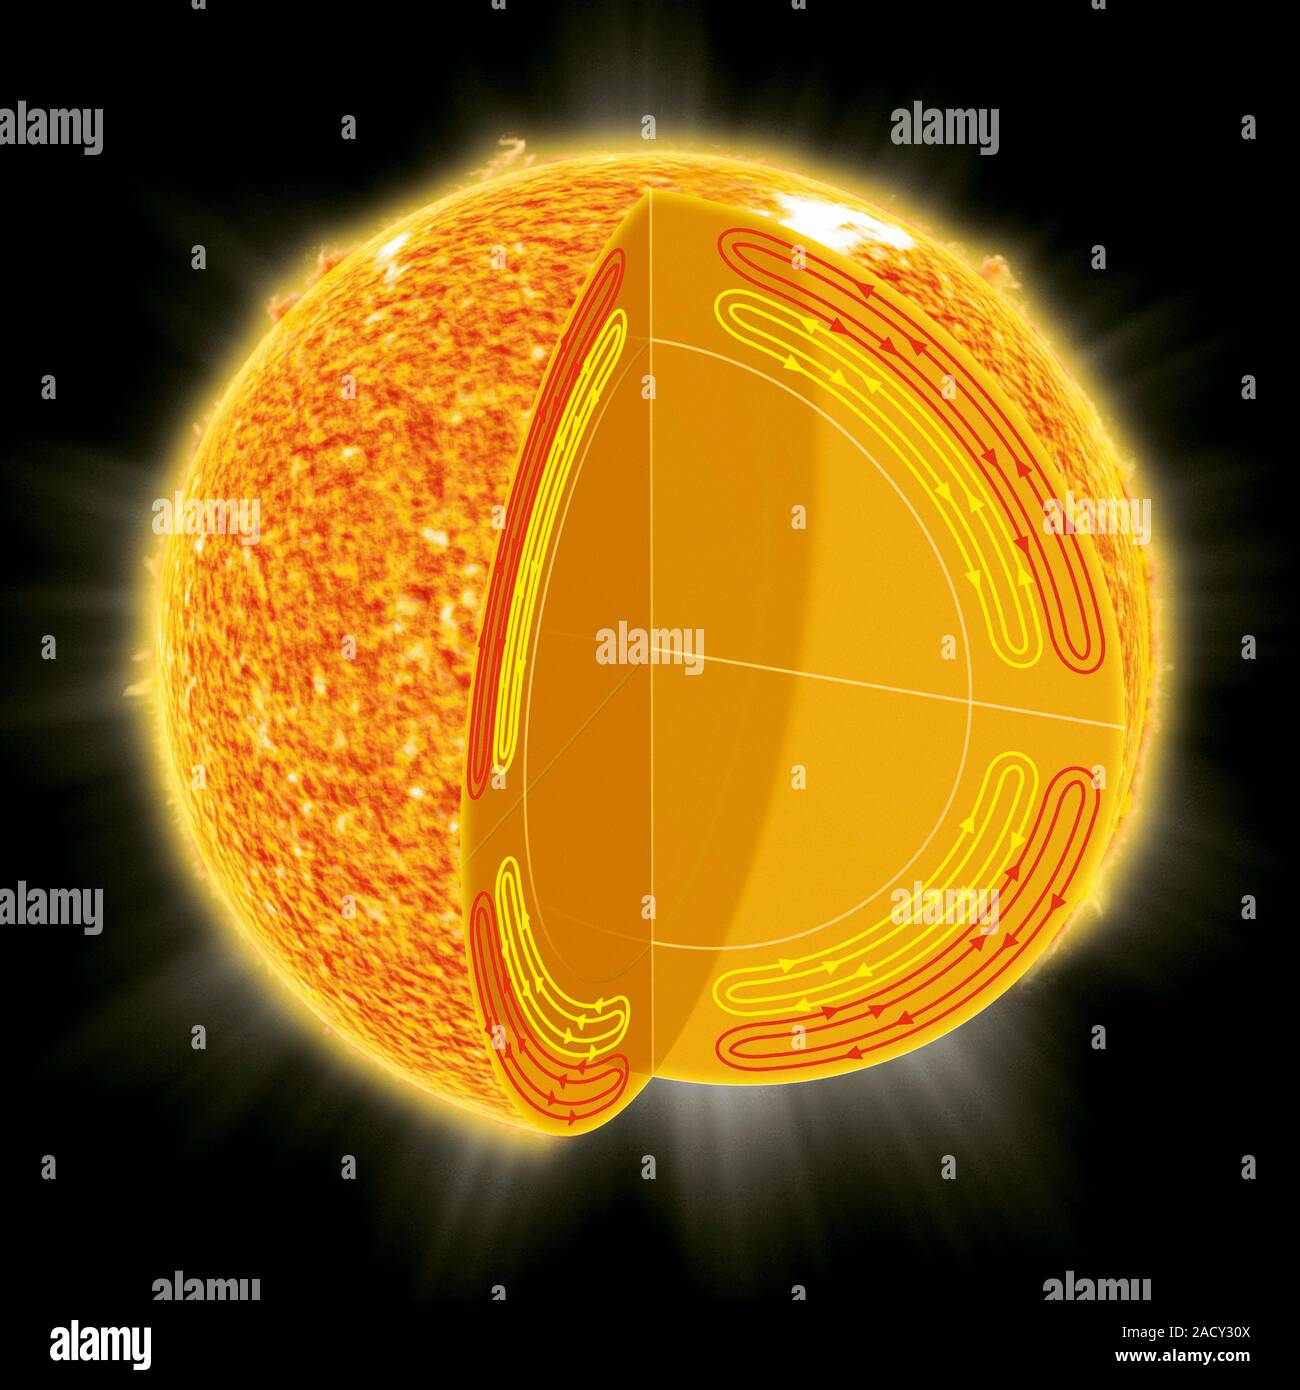 Solar structure. Cutaway computer artwork showing the convection ...